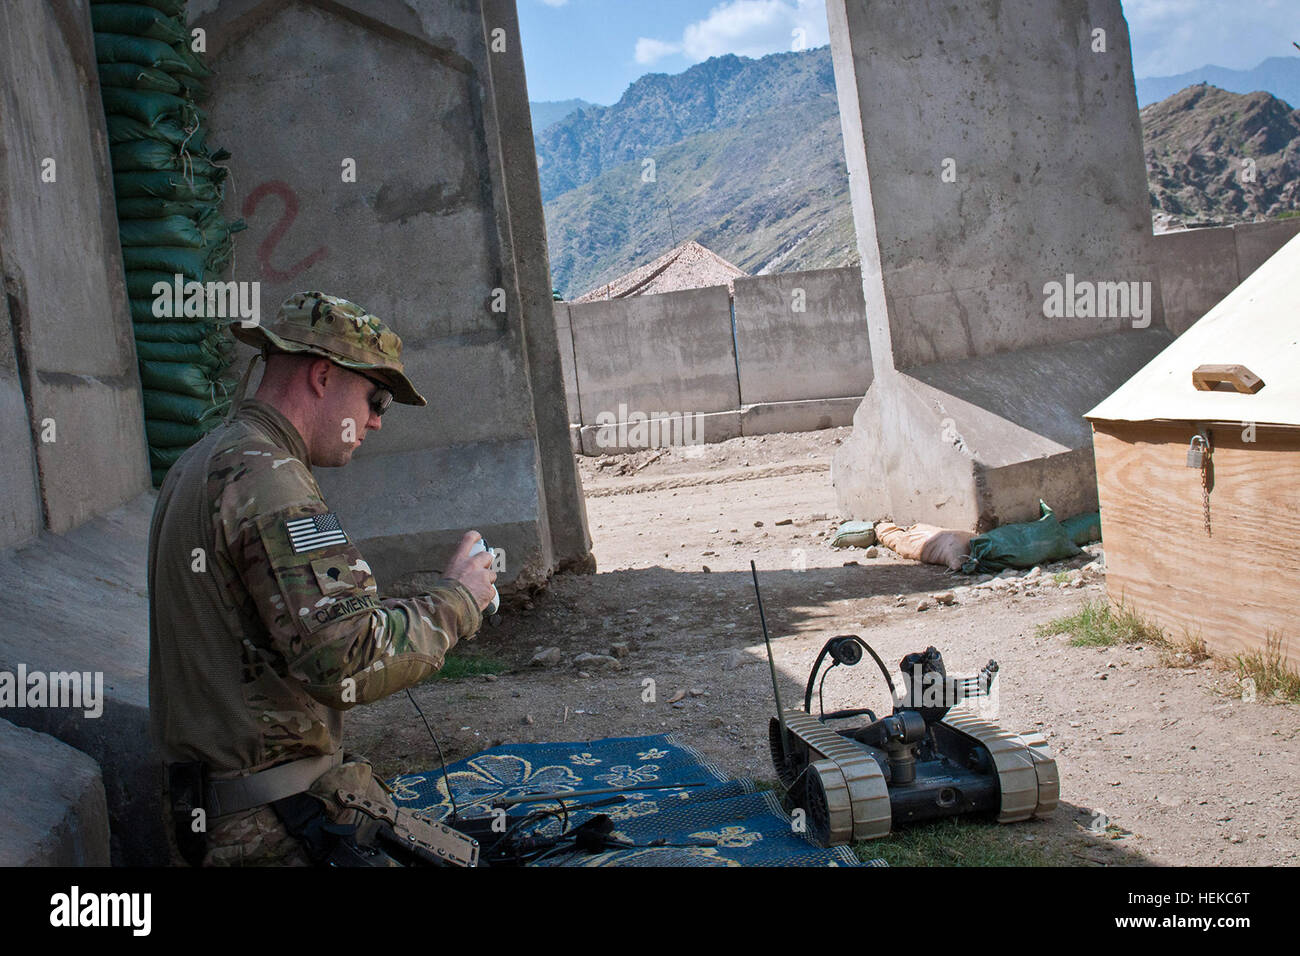 KUNAR PROVINCE, Afghanistan – Explosive ordnance disposal technician, U.S. Army Spc. Andrew B. Clement, a native of Jackson, Tenn., assigned to 129th EOD out of Fort Lewis, Wash., attached to 3rd Brigade Combat Team, 25th Infantry Division, Task Force Bronco, gets a refresher course on a Pacbot 310 EOD robot at Combat Outpost Honaker-Miracle in eastern Afghanistan's Kunar Province, Aug. 1. Clement said the robot is compact enough to be carried in a backpack for dismounted patrols. (Photo by U.S. Army Sgt. 1st Class Mark Burrell, 210th MPAD) Electronics keep soldiers safe distance from IEDs 110 Stock Photo